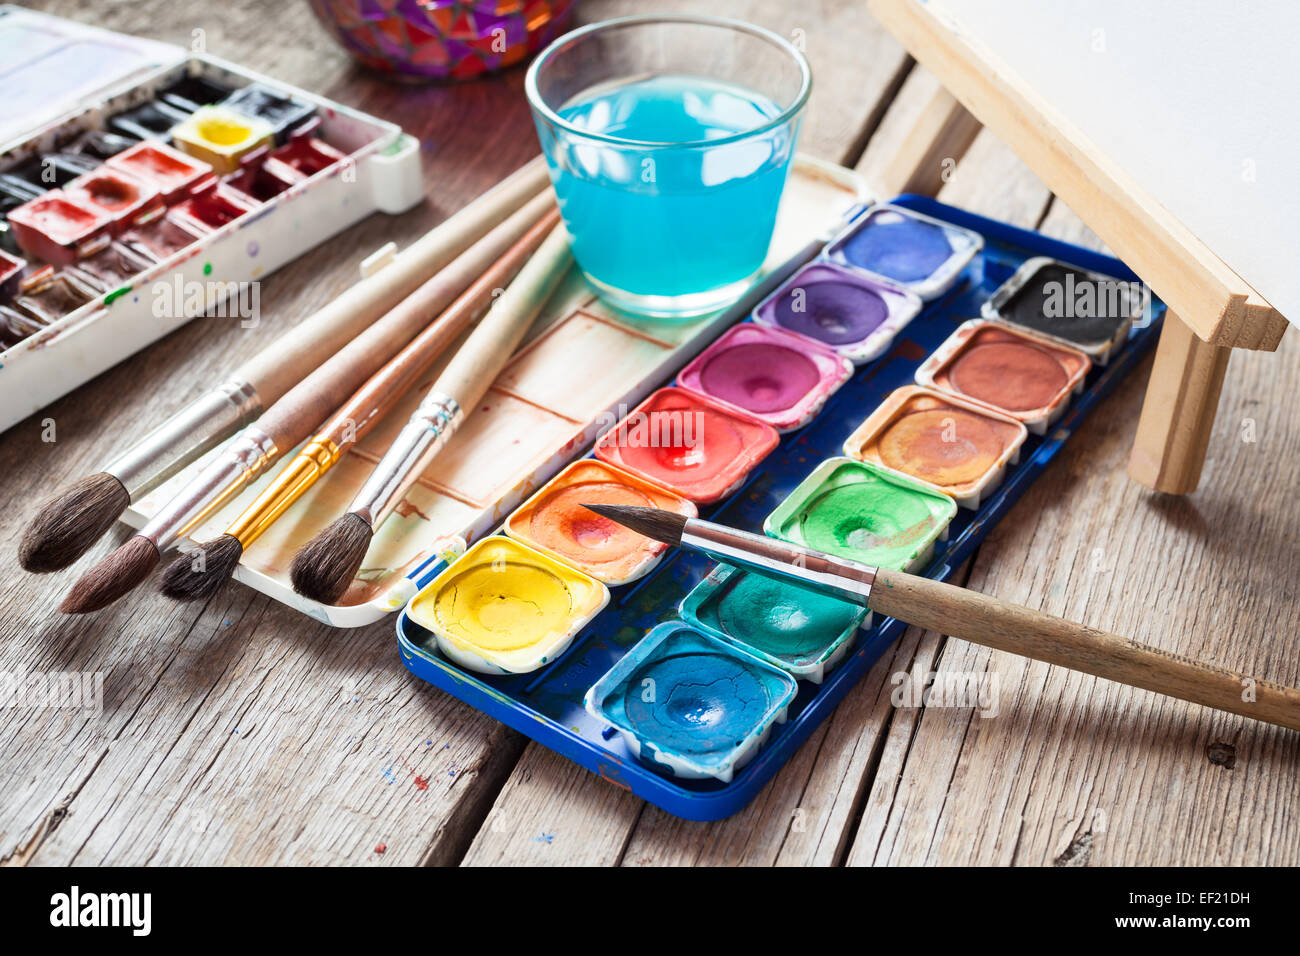 Box of watercolor paints, art brushes, glass of water and easel with canvas or paper on old wooden table. Stock Photo